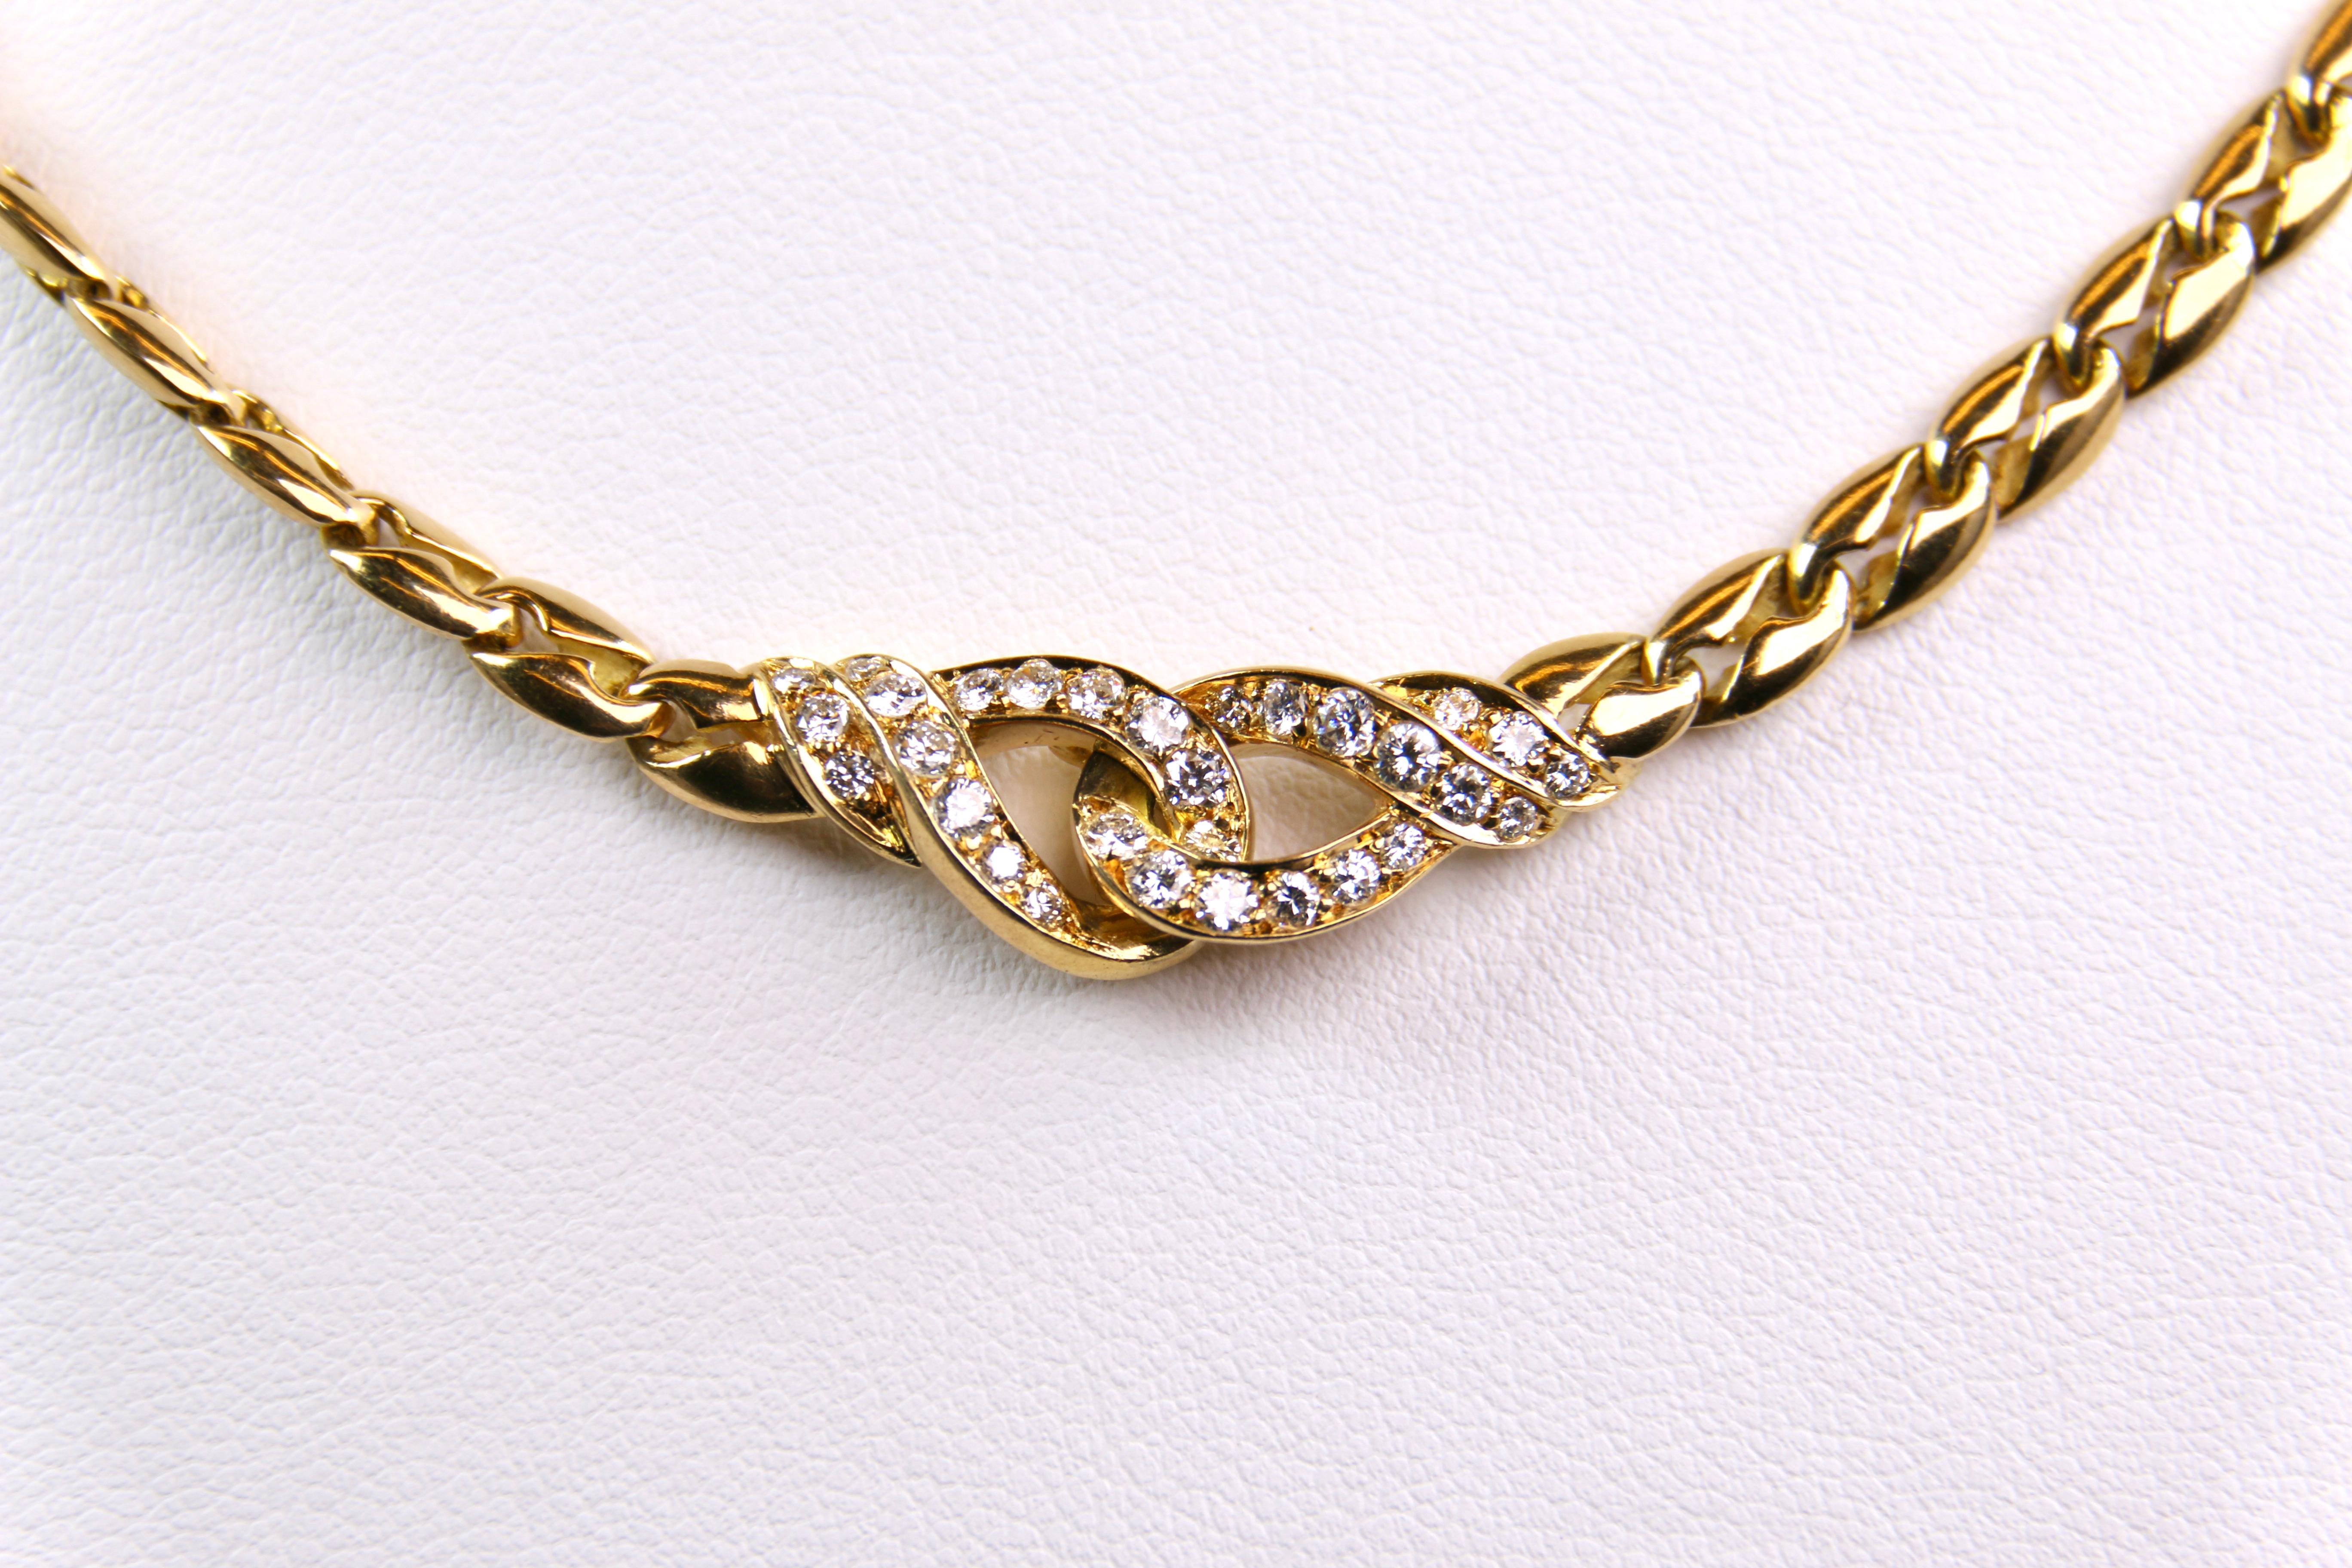 Designer Mauboussin Diamond Choker Necklace in 18 Karat Yellow Gold.  Within this beautiful choker are 30 round diamonds, weighing approximately .90 carats total weight, G in color and VS2 in clarity.  The necklace is 16